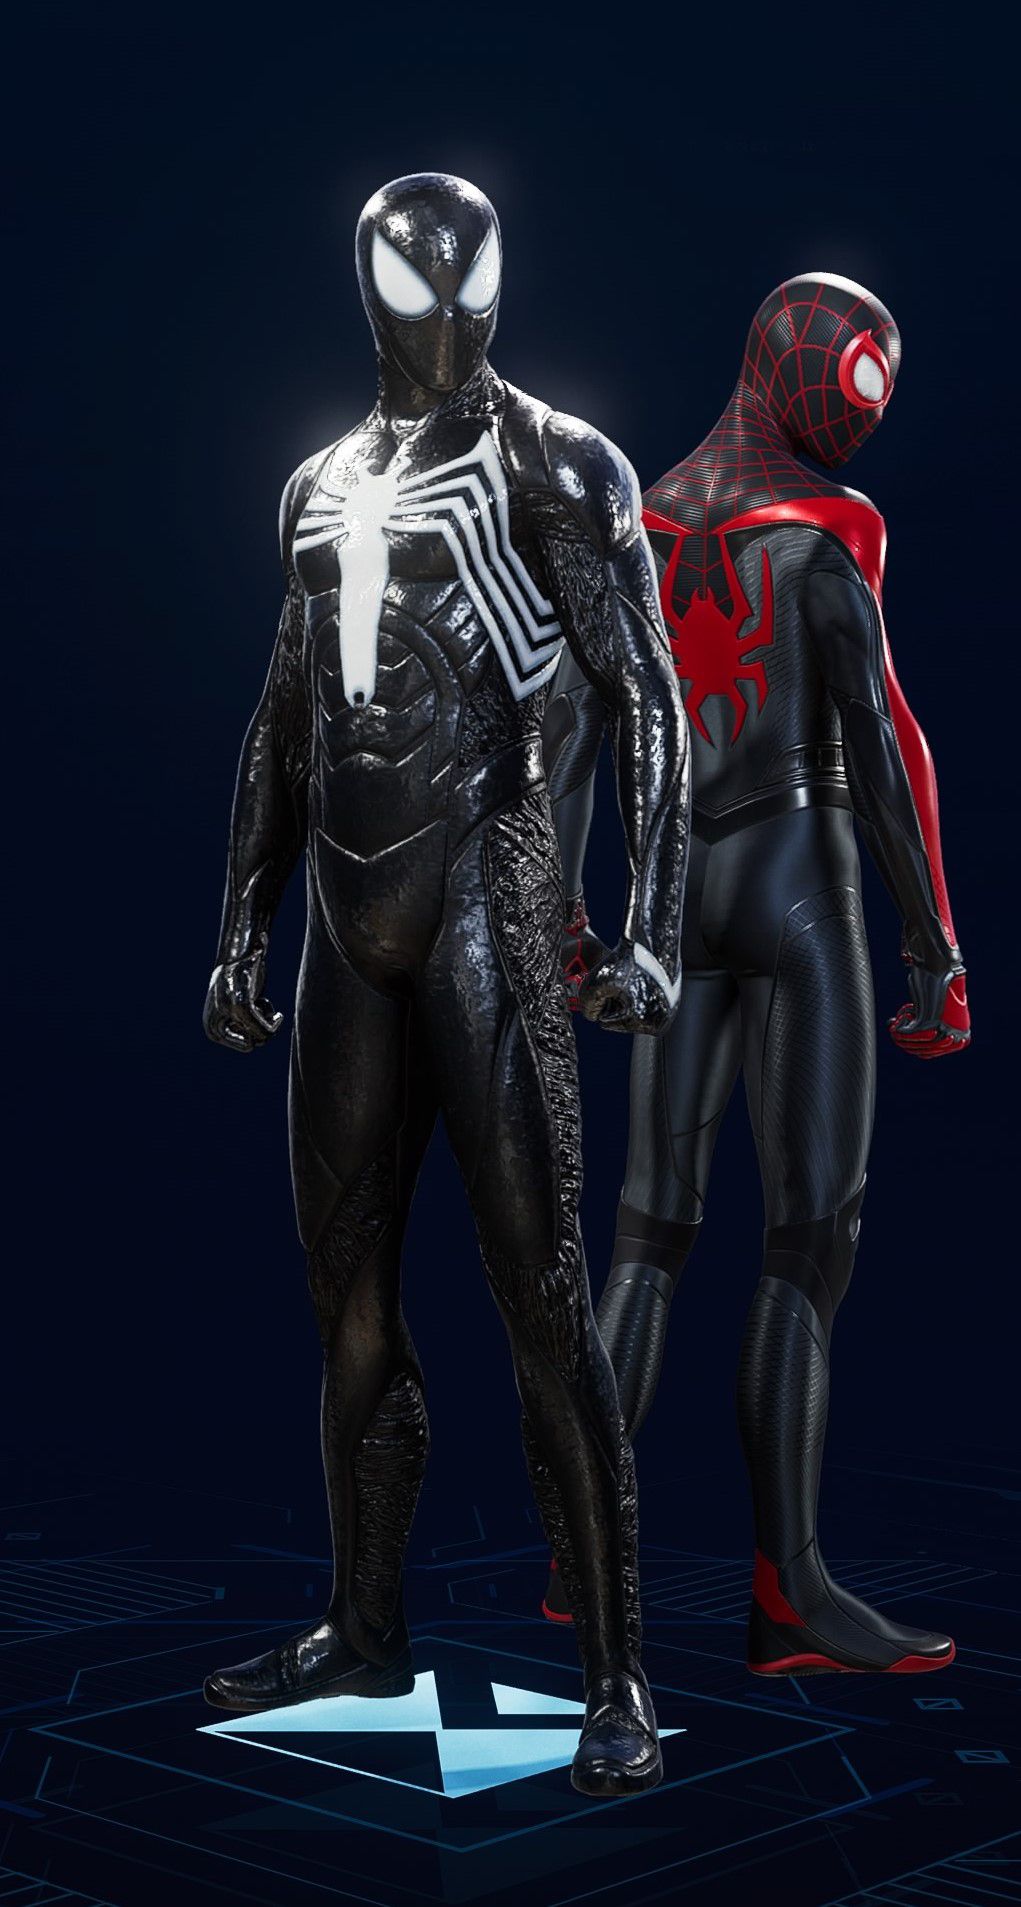 Peter Parker stands in his Black Suit in the suit selection screen of Spider-Man 2.